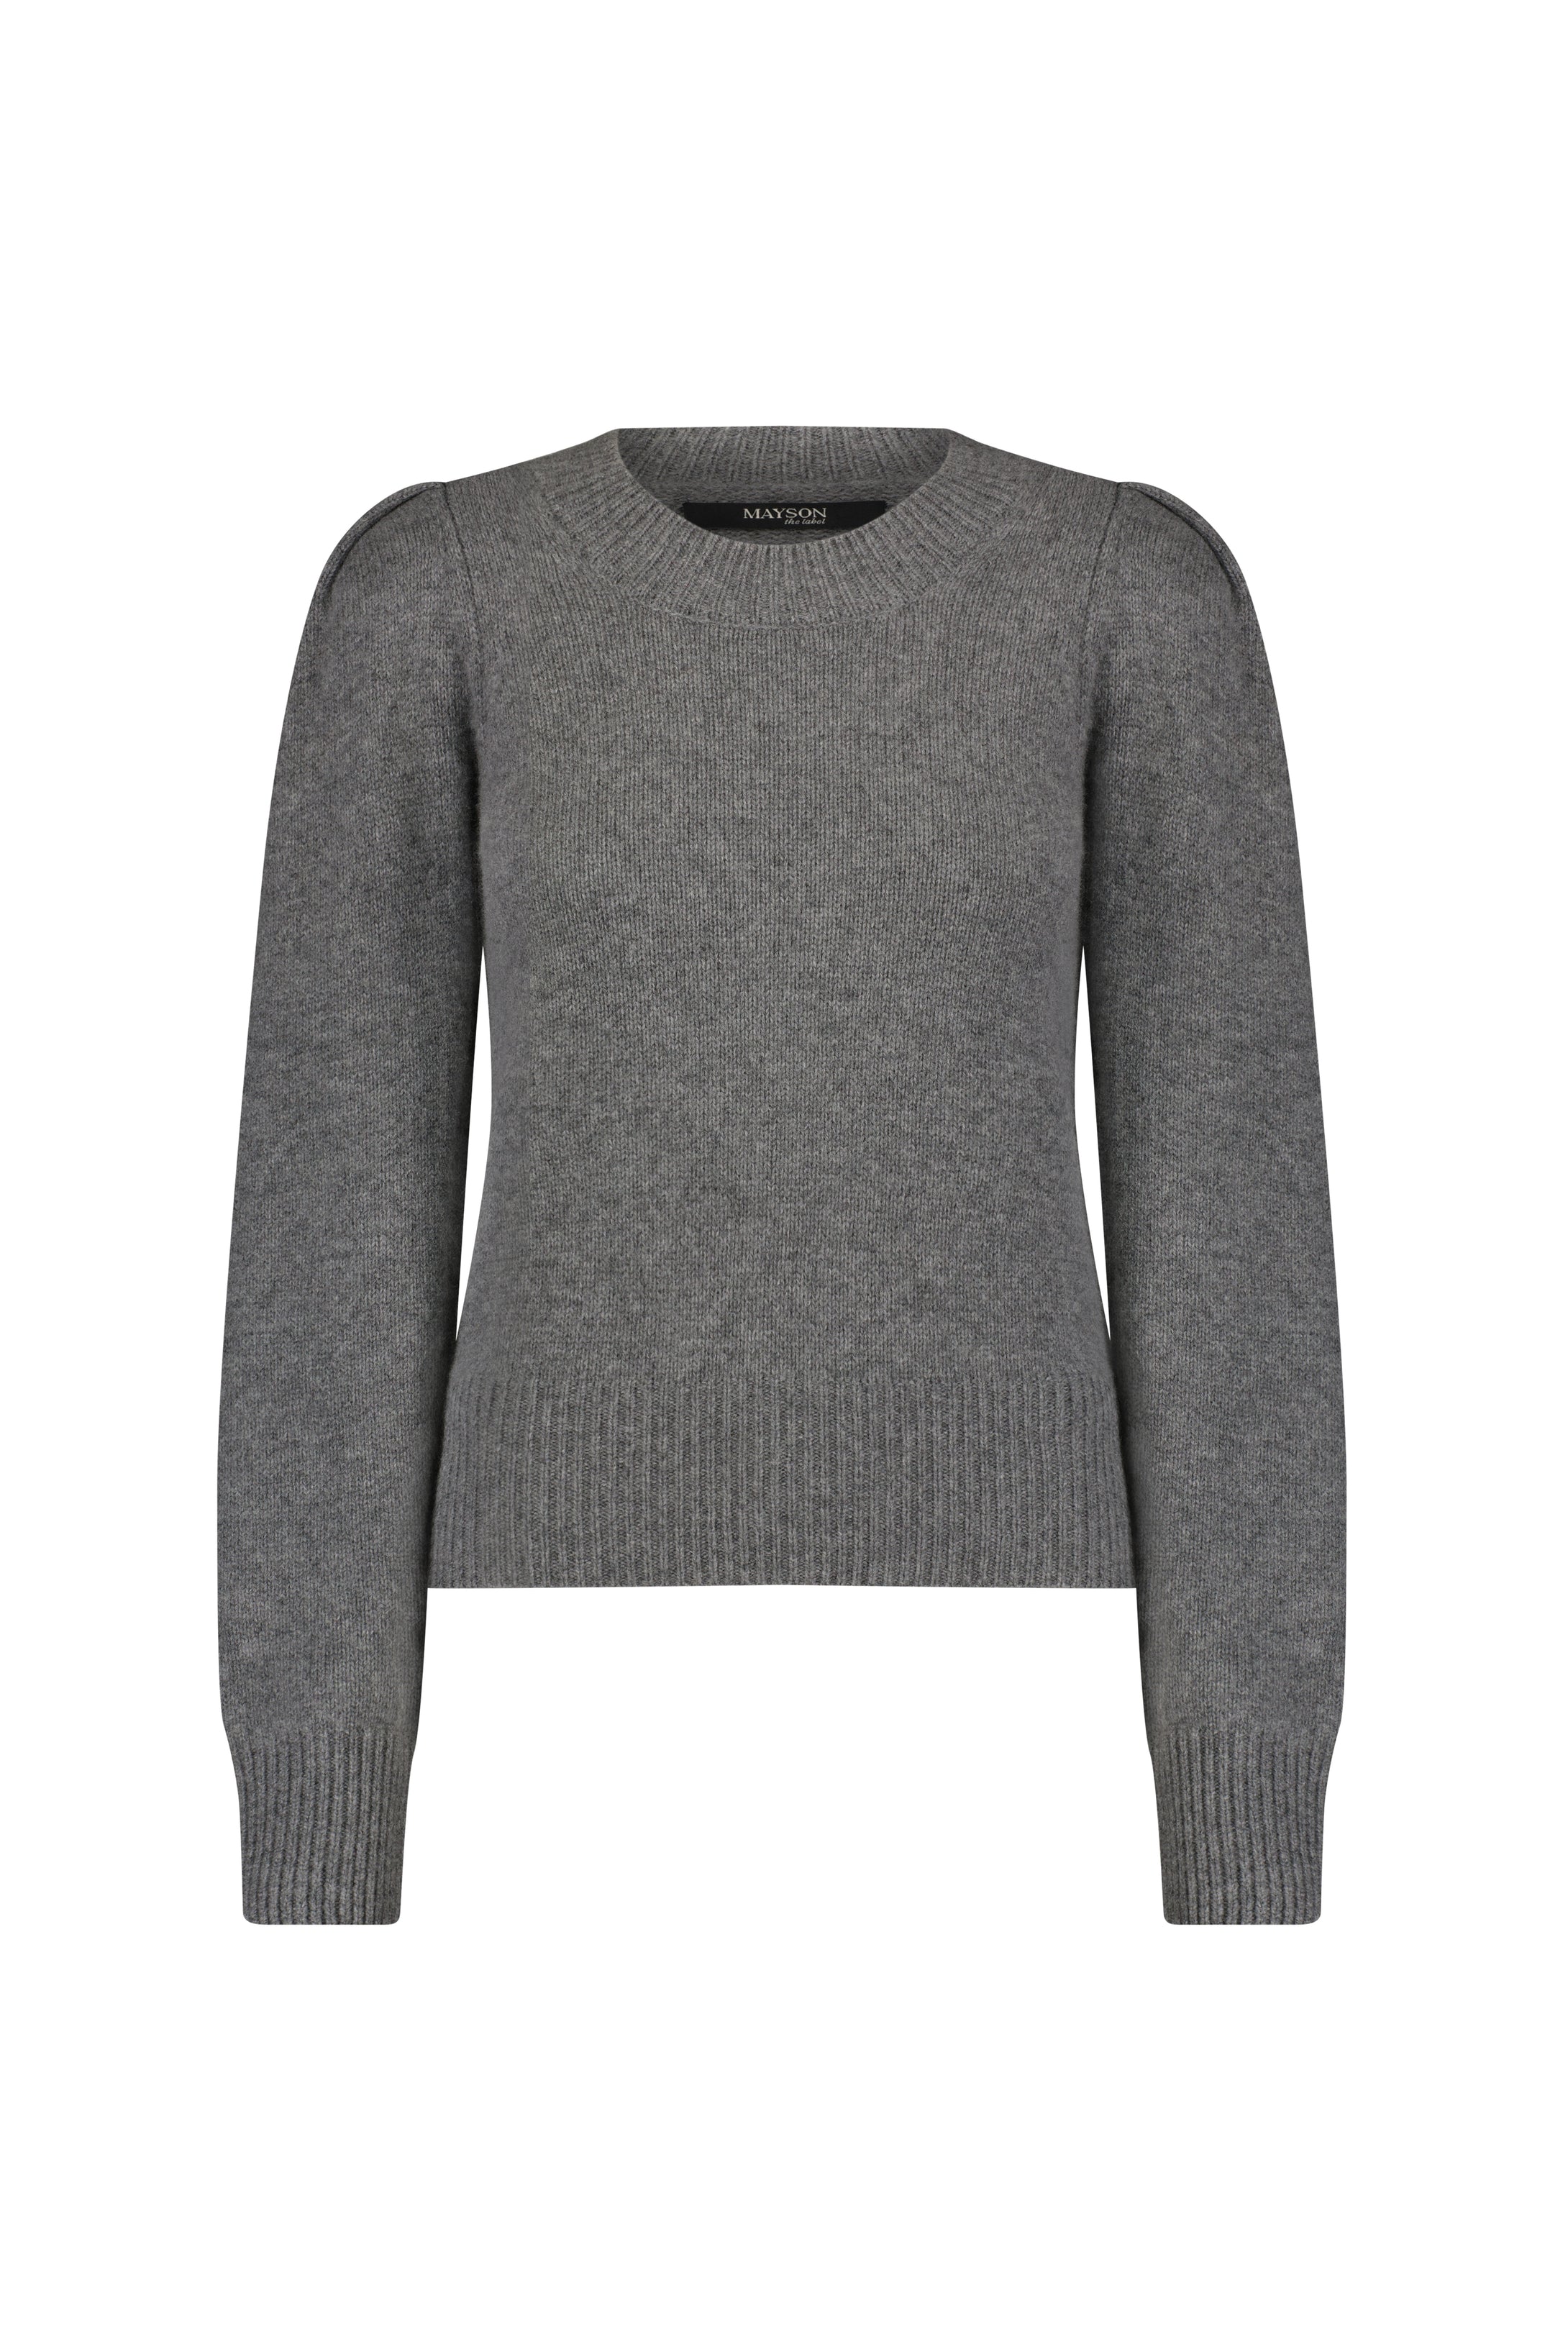 Wool Cashmere Puff Sleeve Sweater – MAYSON the label